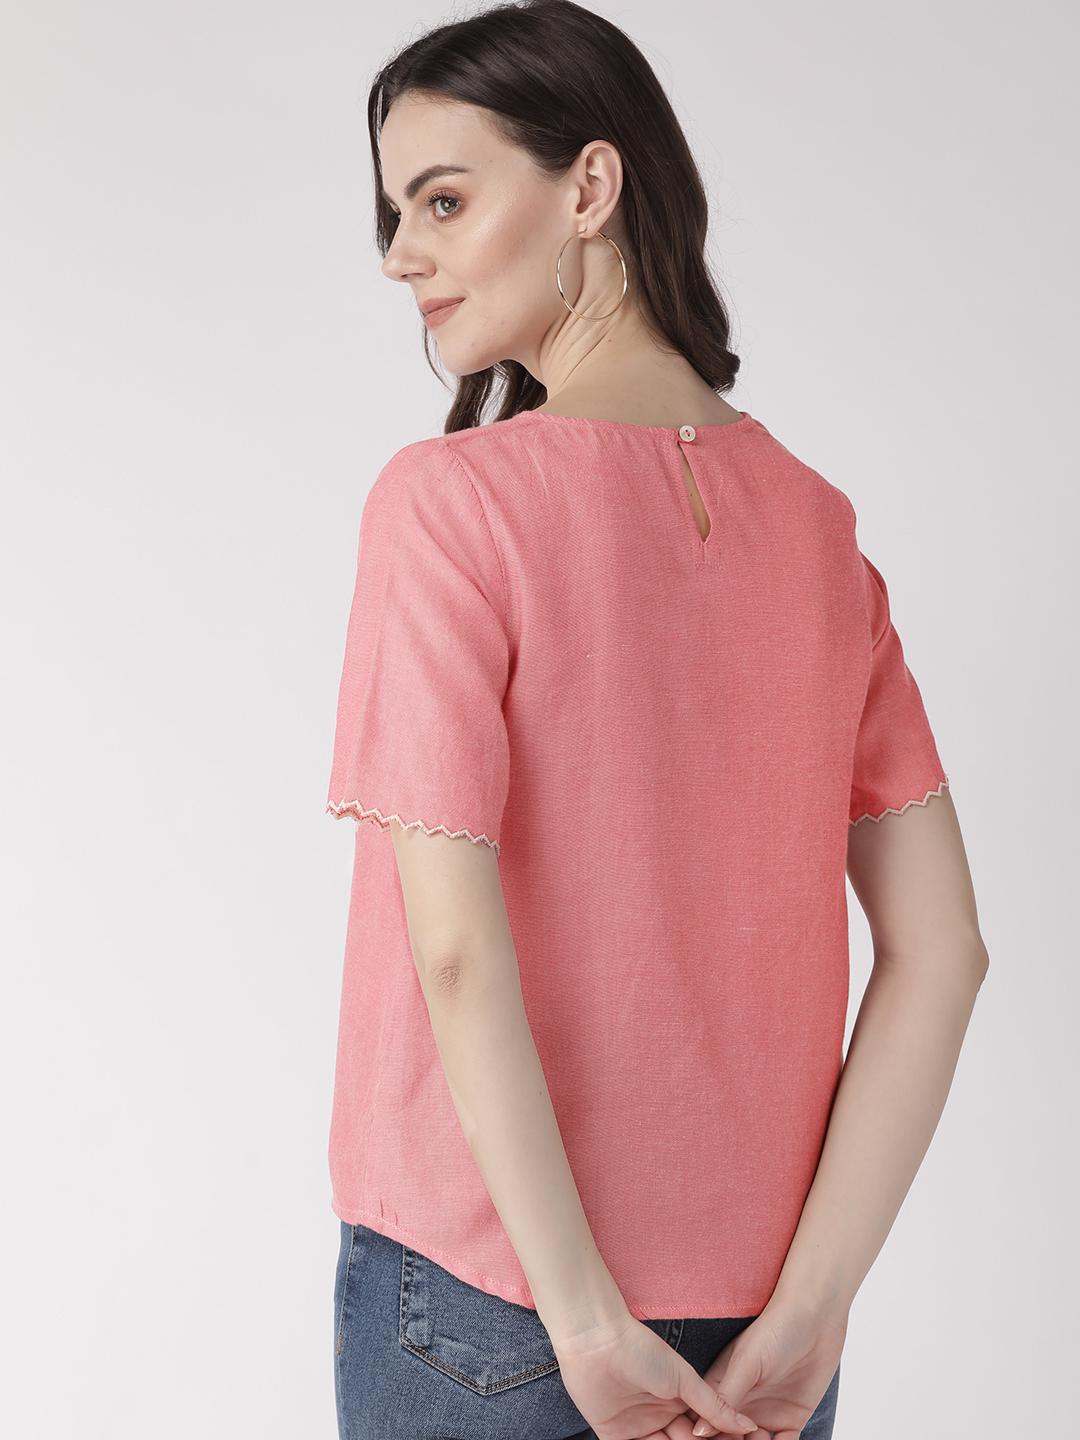 Pink chambary top with contrast embroidery